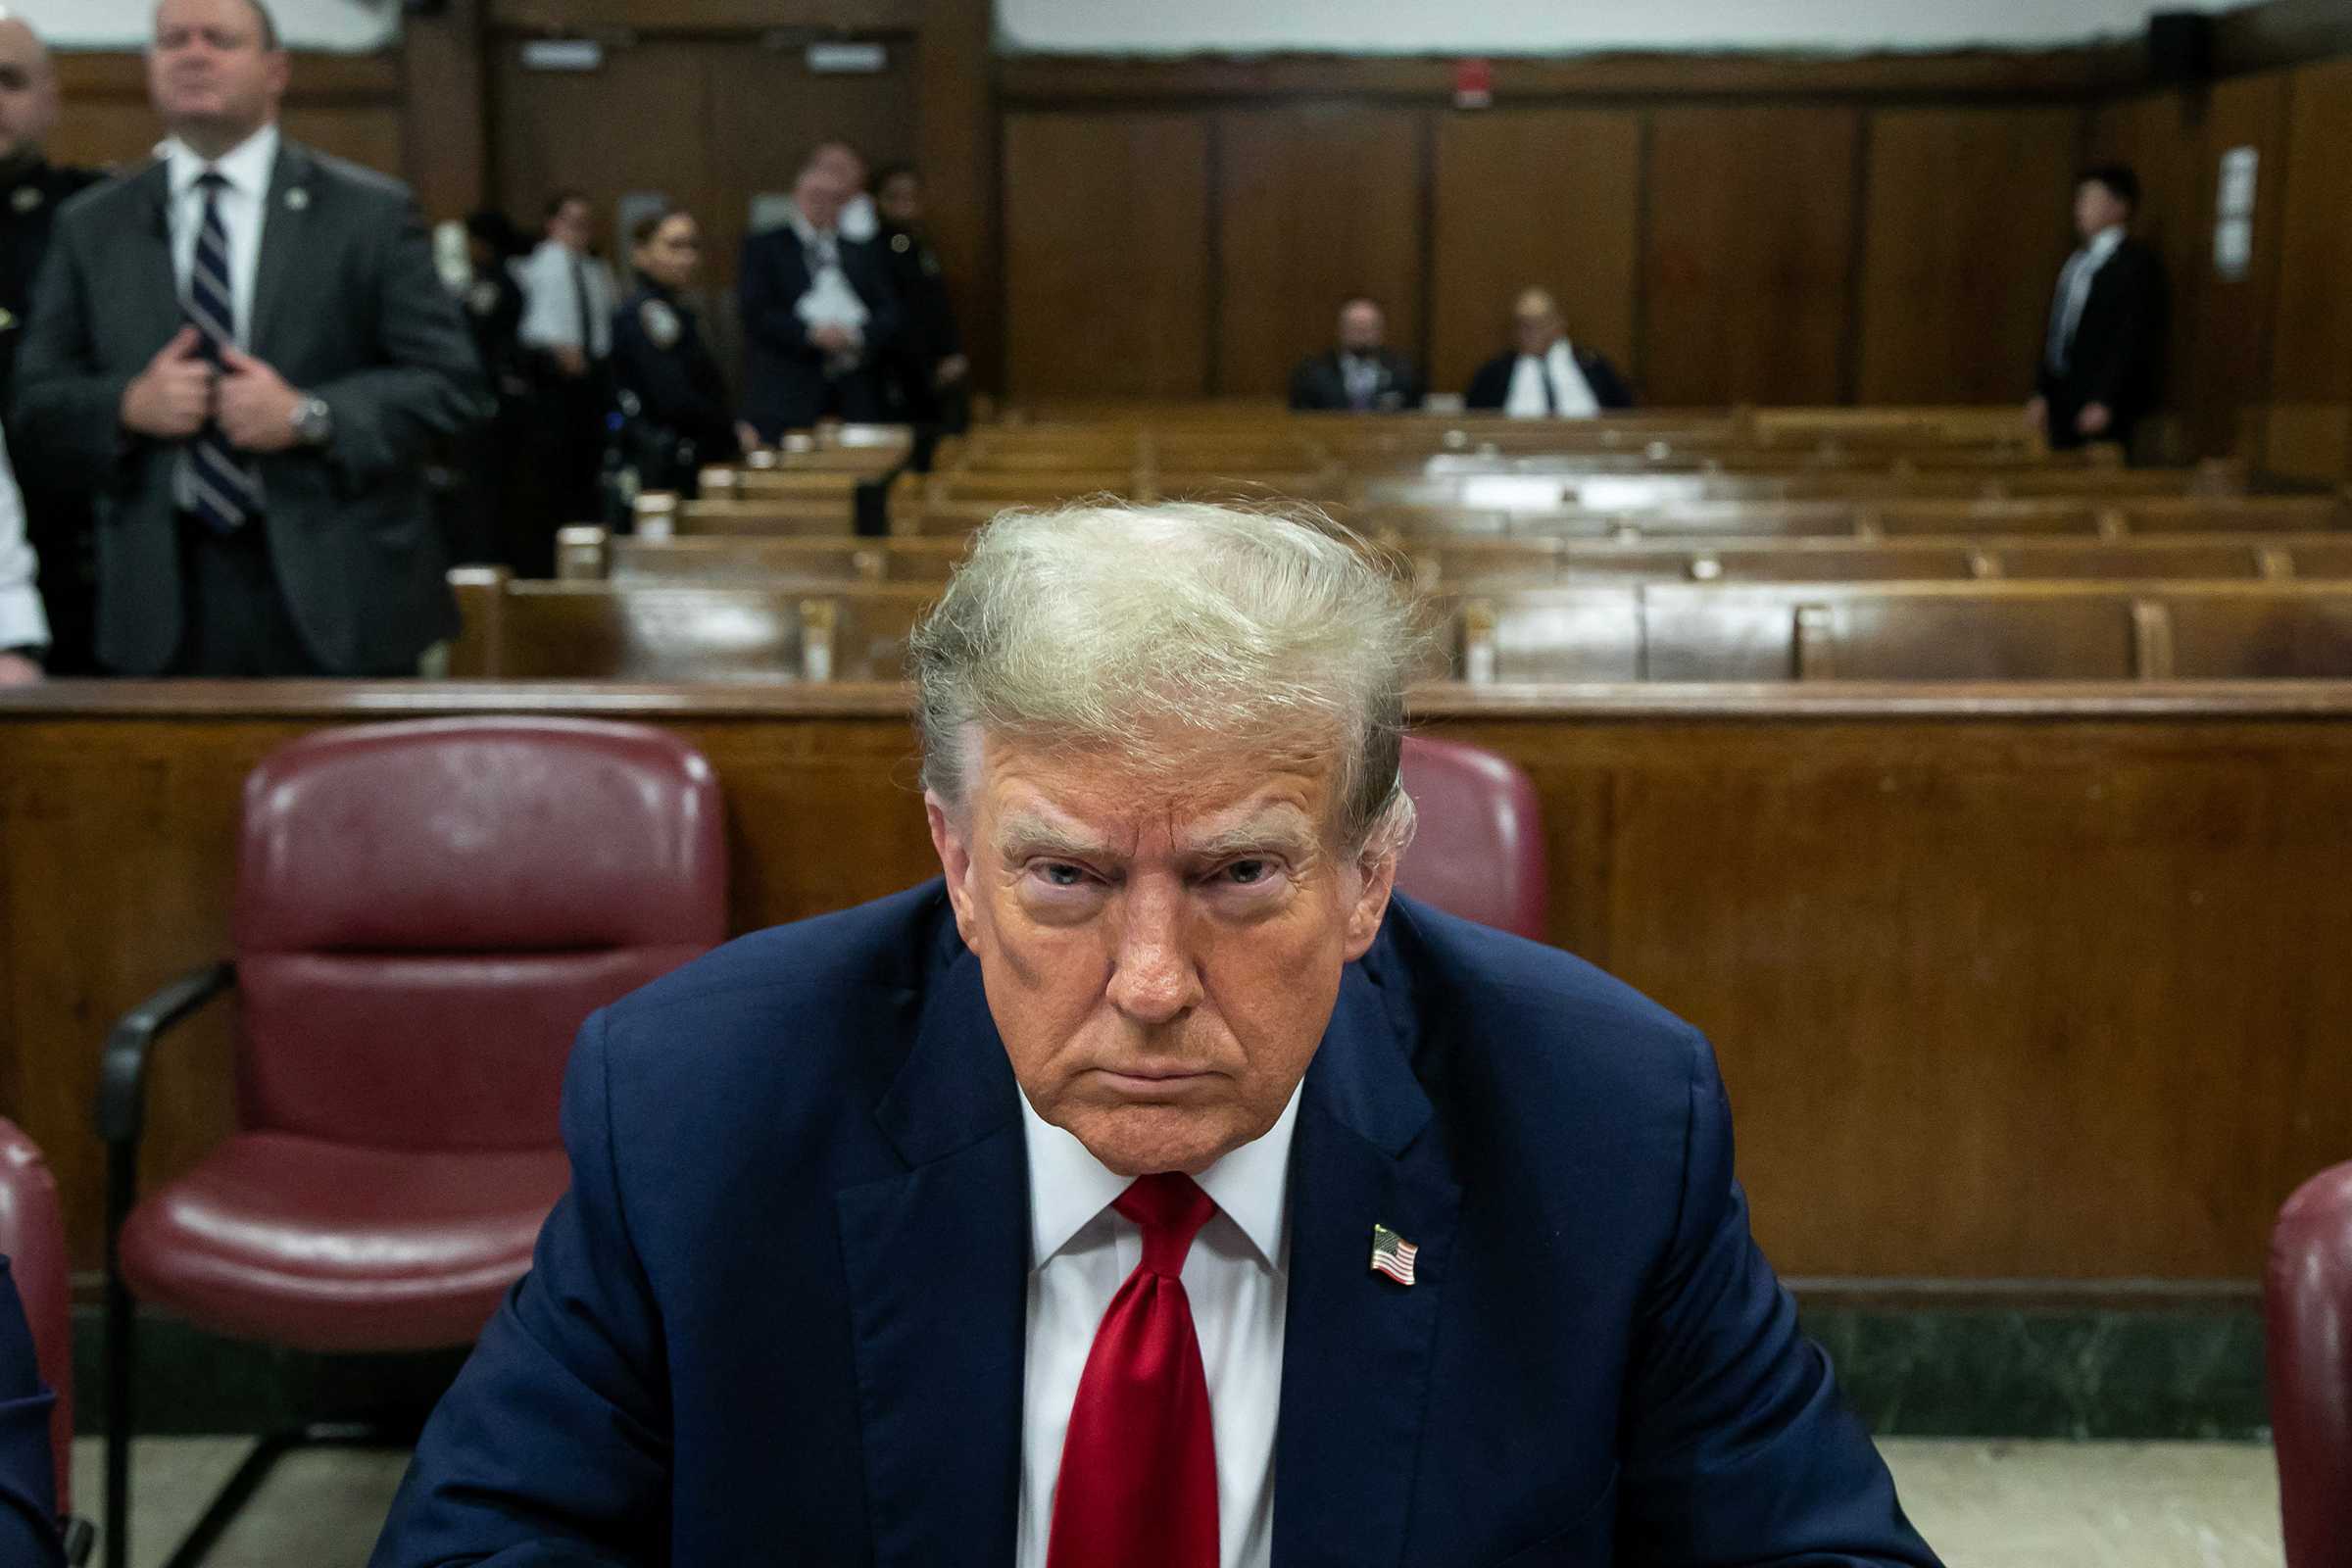 Former U.S. President Donald Trump attends the first day of his trial for allegedly covering up hush money payments linked to extramarital affairs, at Manhattan Criminal Court in New York City on April 15, 2024.